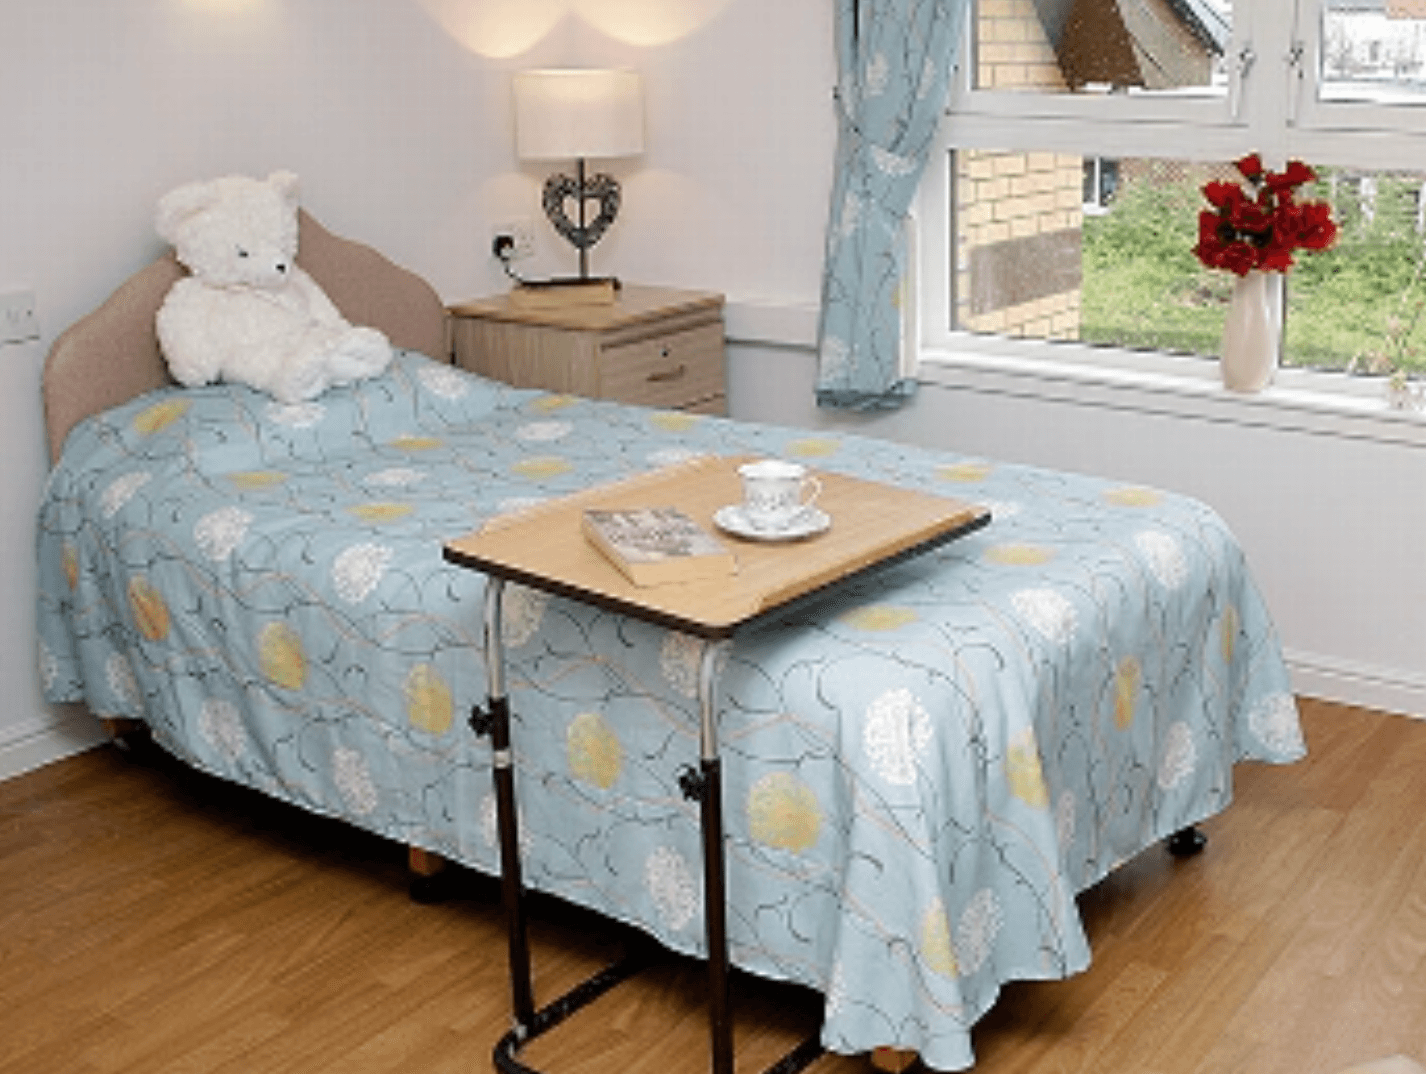 Bedroom of Deanfield Care Home in Glasgow, Scotland